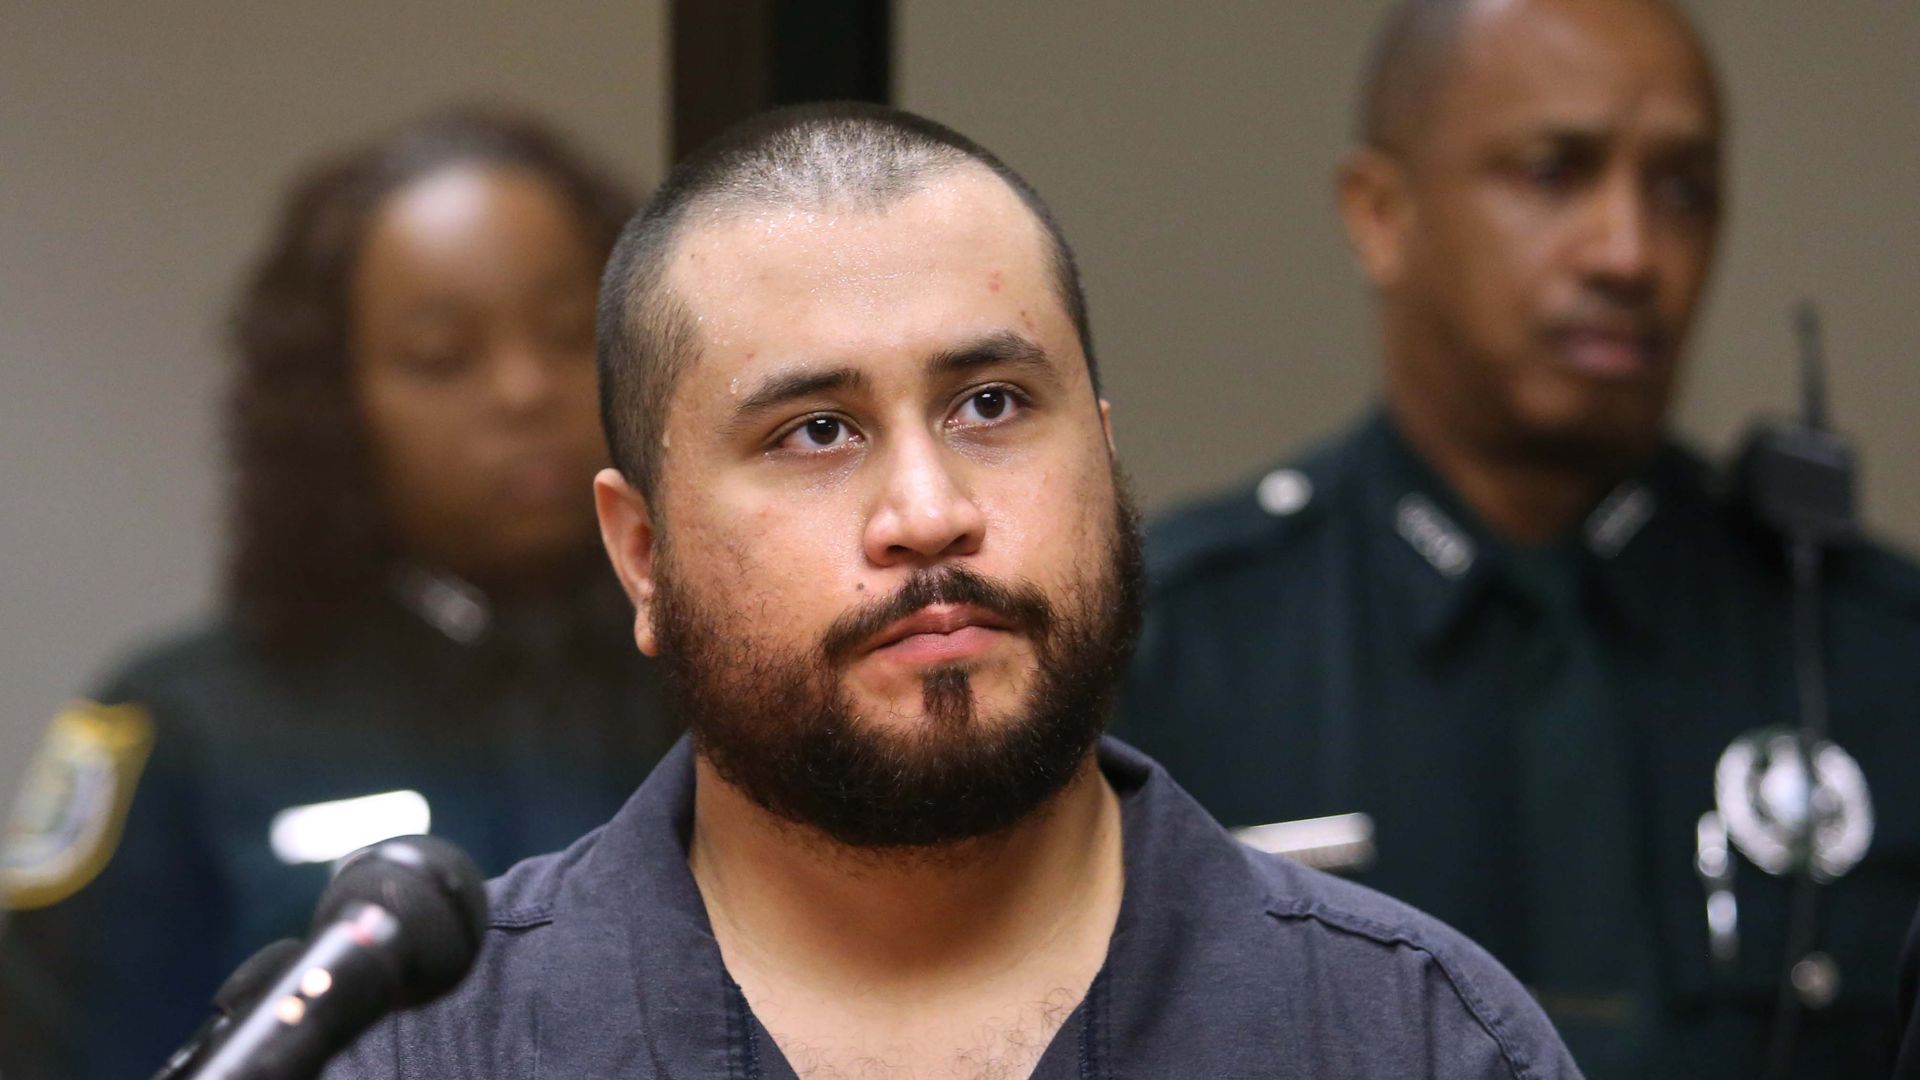  George Zimmerman,  shooter in the death of Trayvon Martin, faces a judge during a hearing on charges including aggravated assault of his girlfriend November 19, 2013 in Sanford, Florida. 